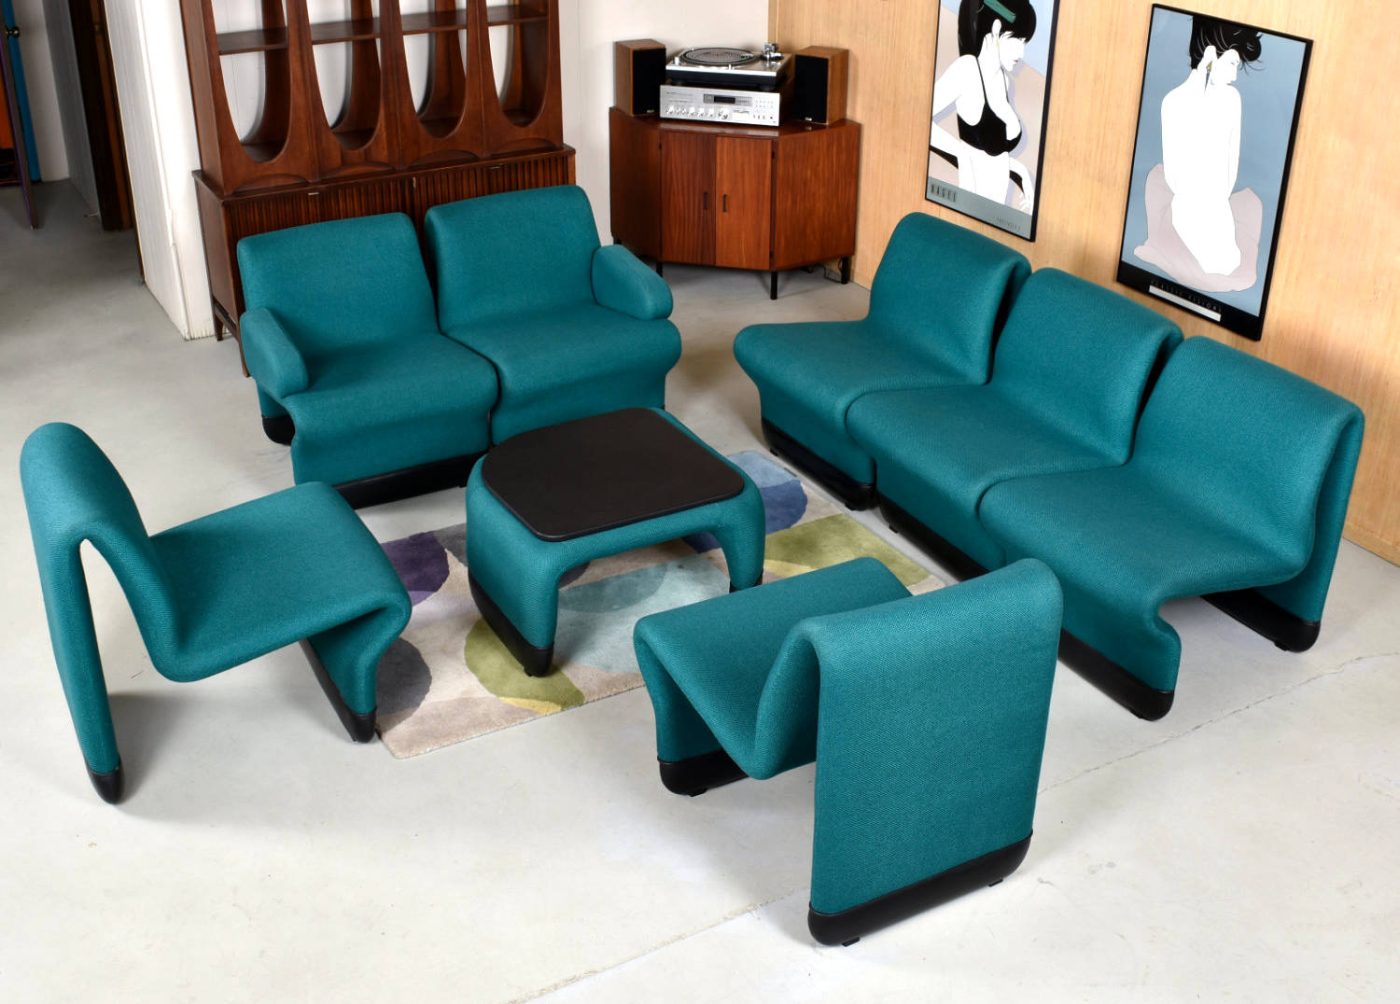 A 1960S BROYHILL BRASILIA ROOM DIVIDER and 1980S MODULAR SEATING by PAUL BOULVA for Artopex in the showroom at Furnish Me Vintage